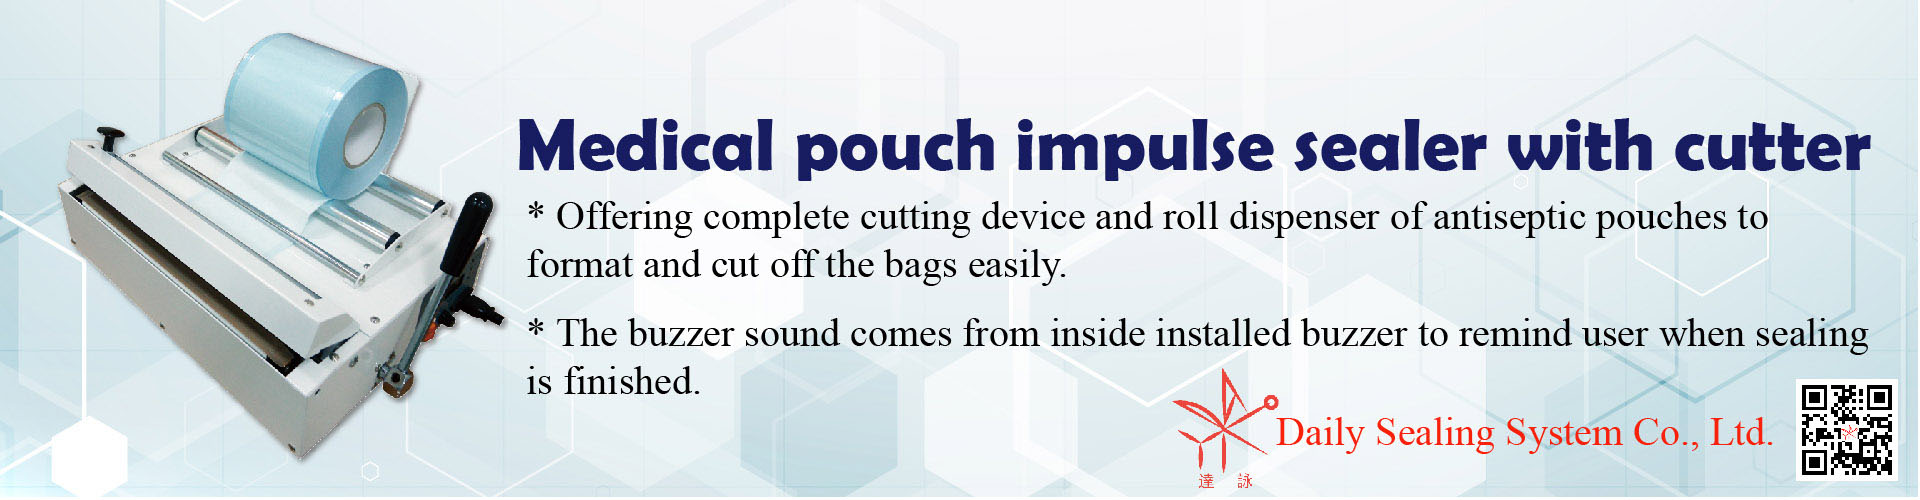 Medical pouch impulse sealer with cutter